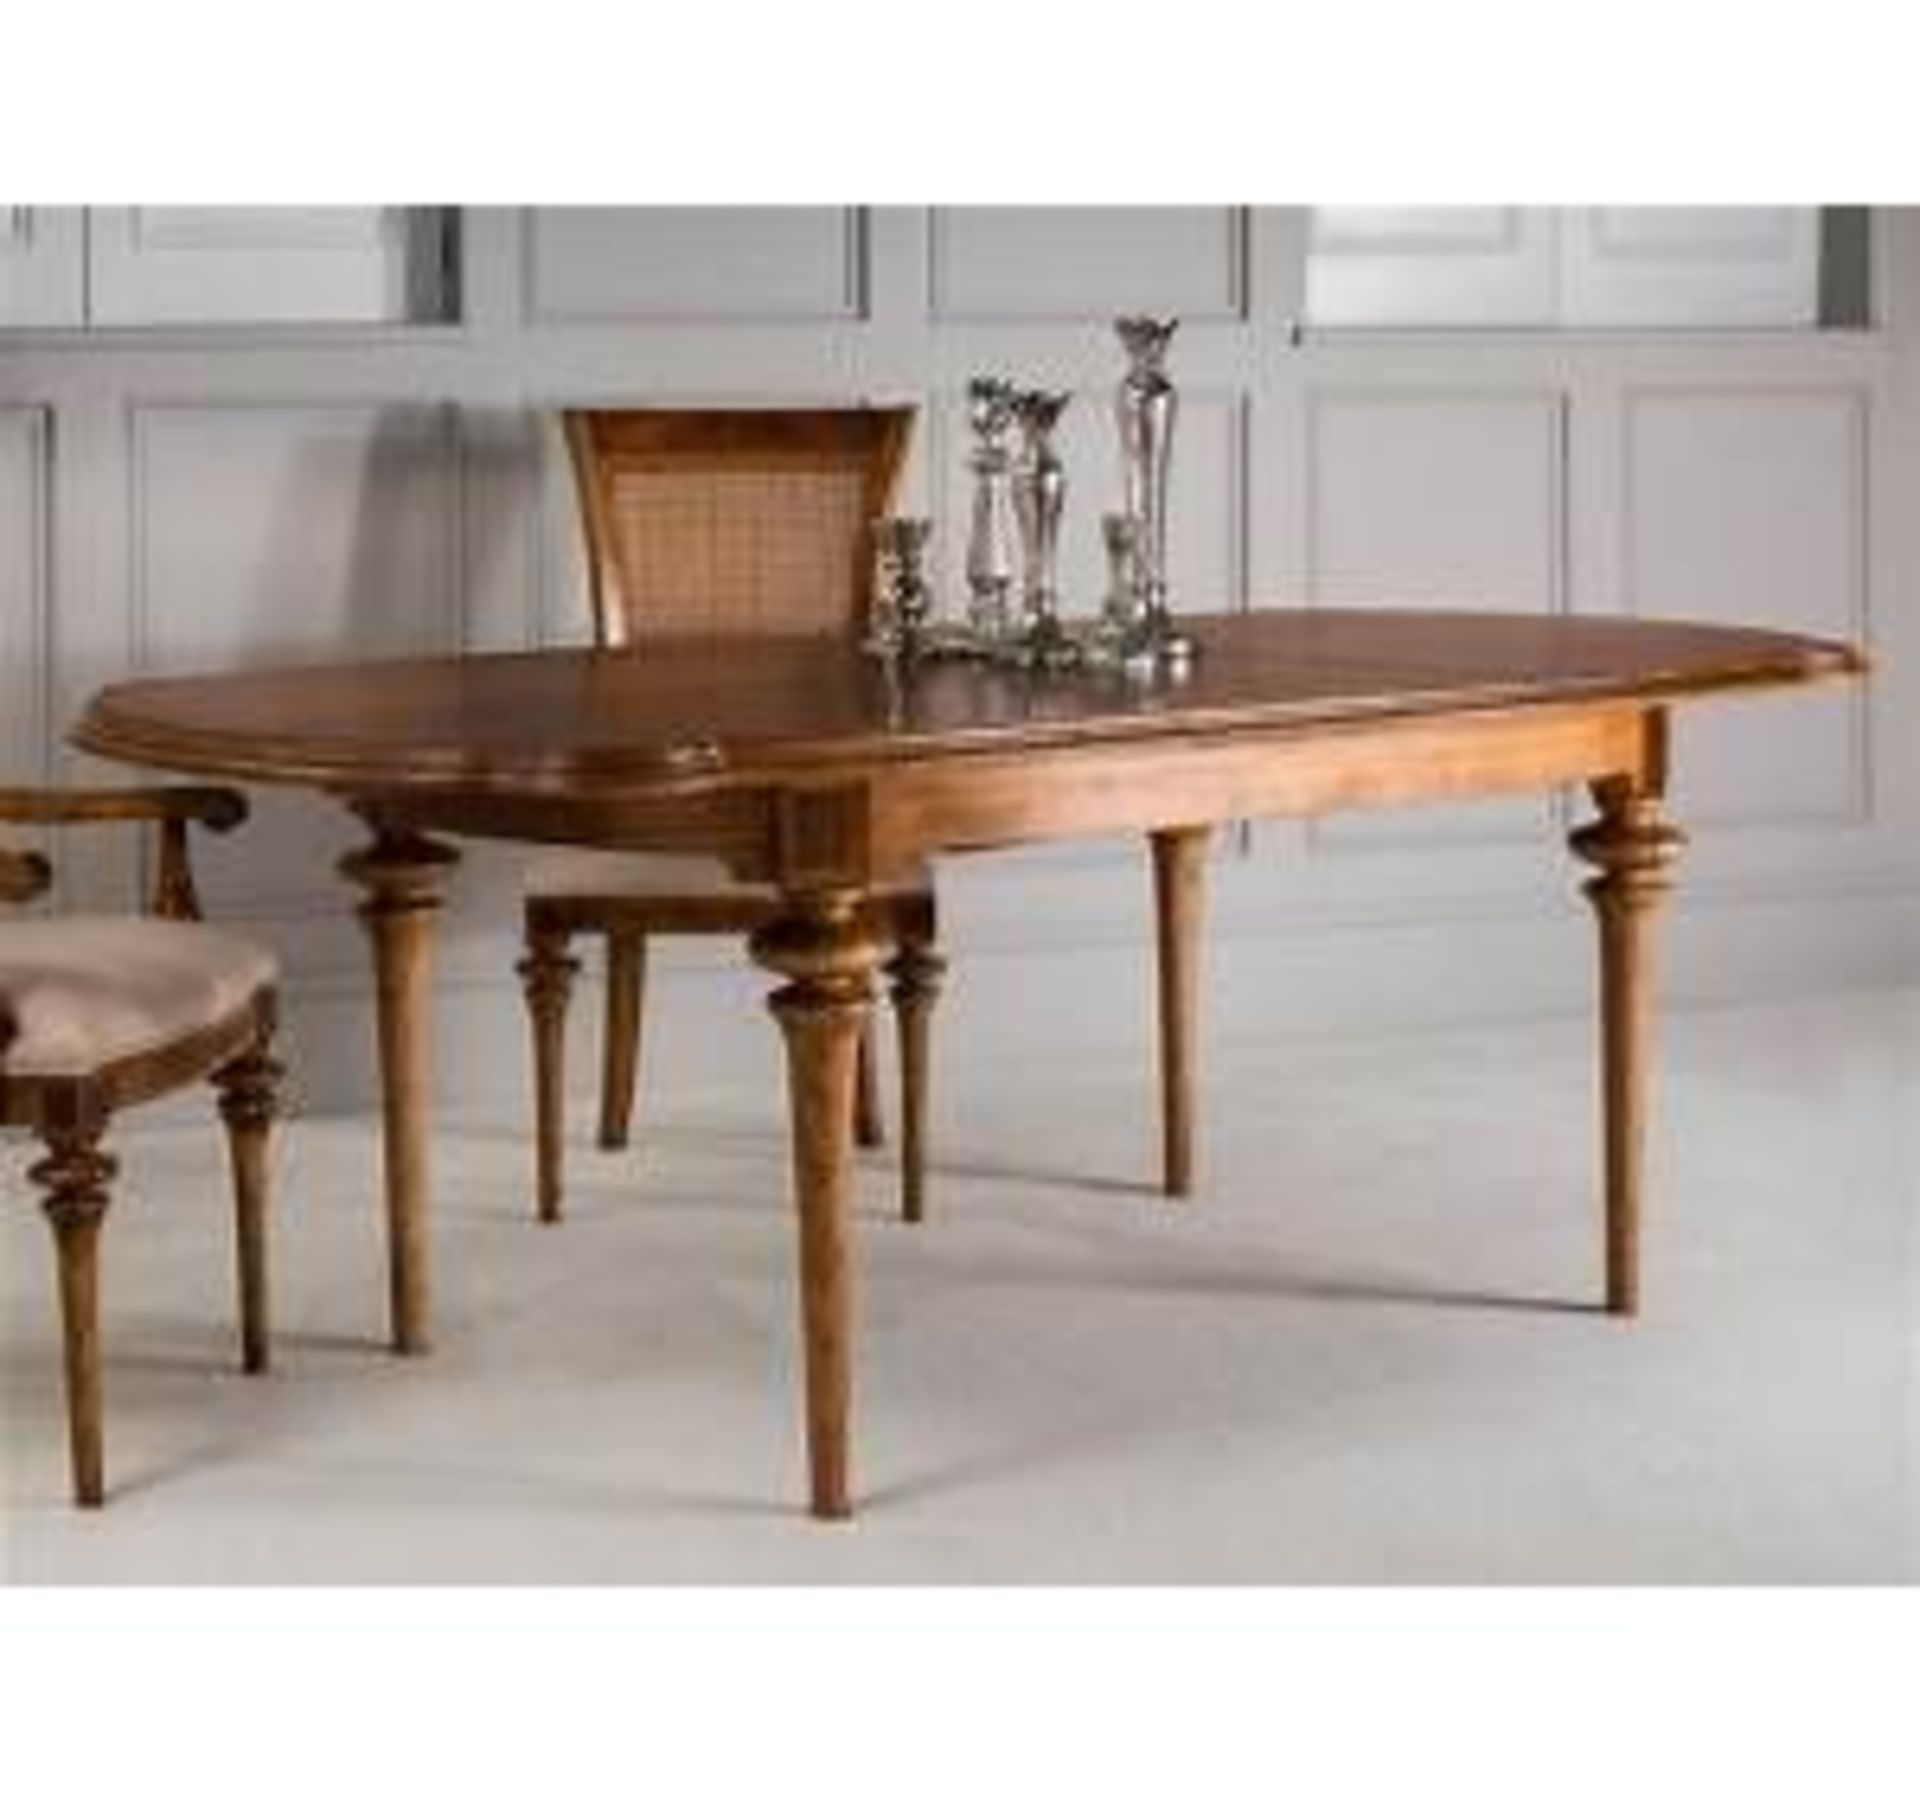 Spire Dining Large Extending Table Blonde European Walnut With Intricate Inlays Antiqued Hand Wax - Image 2 of 3